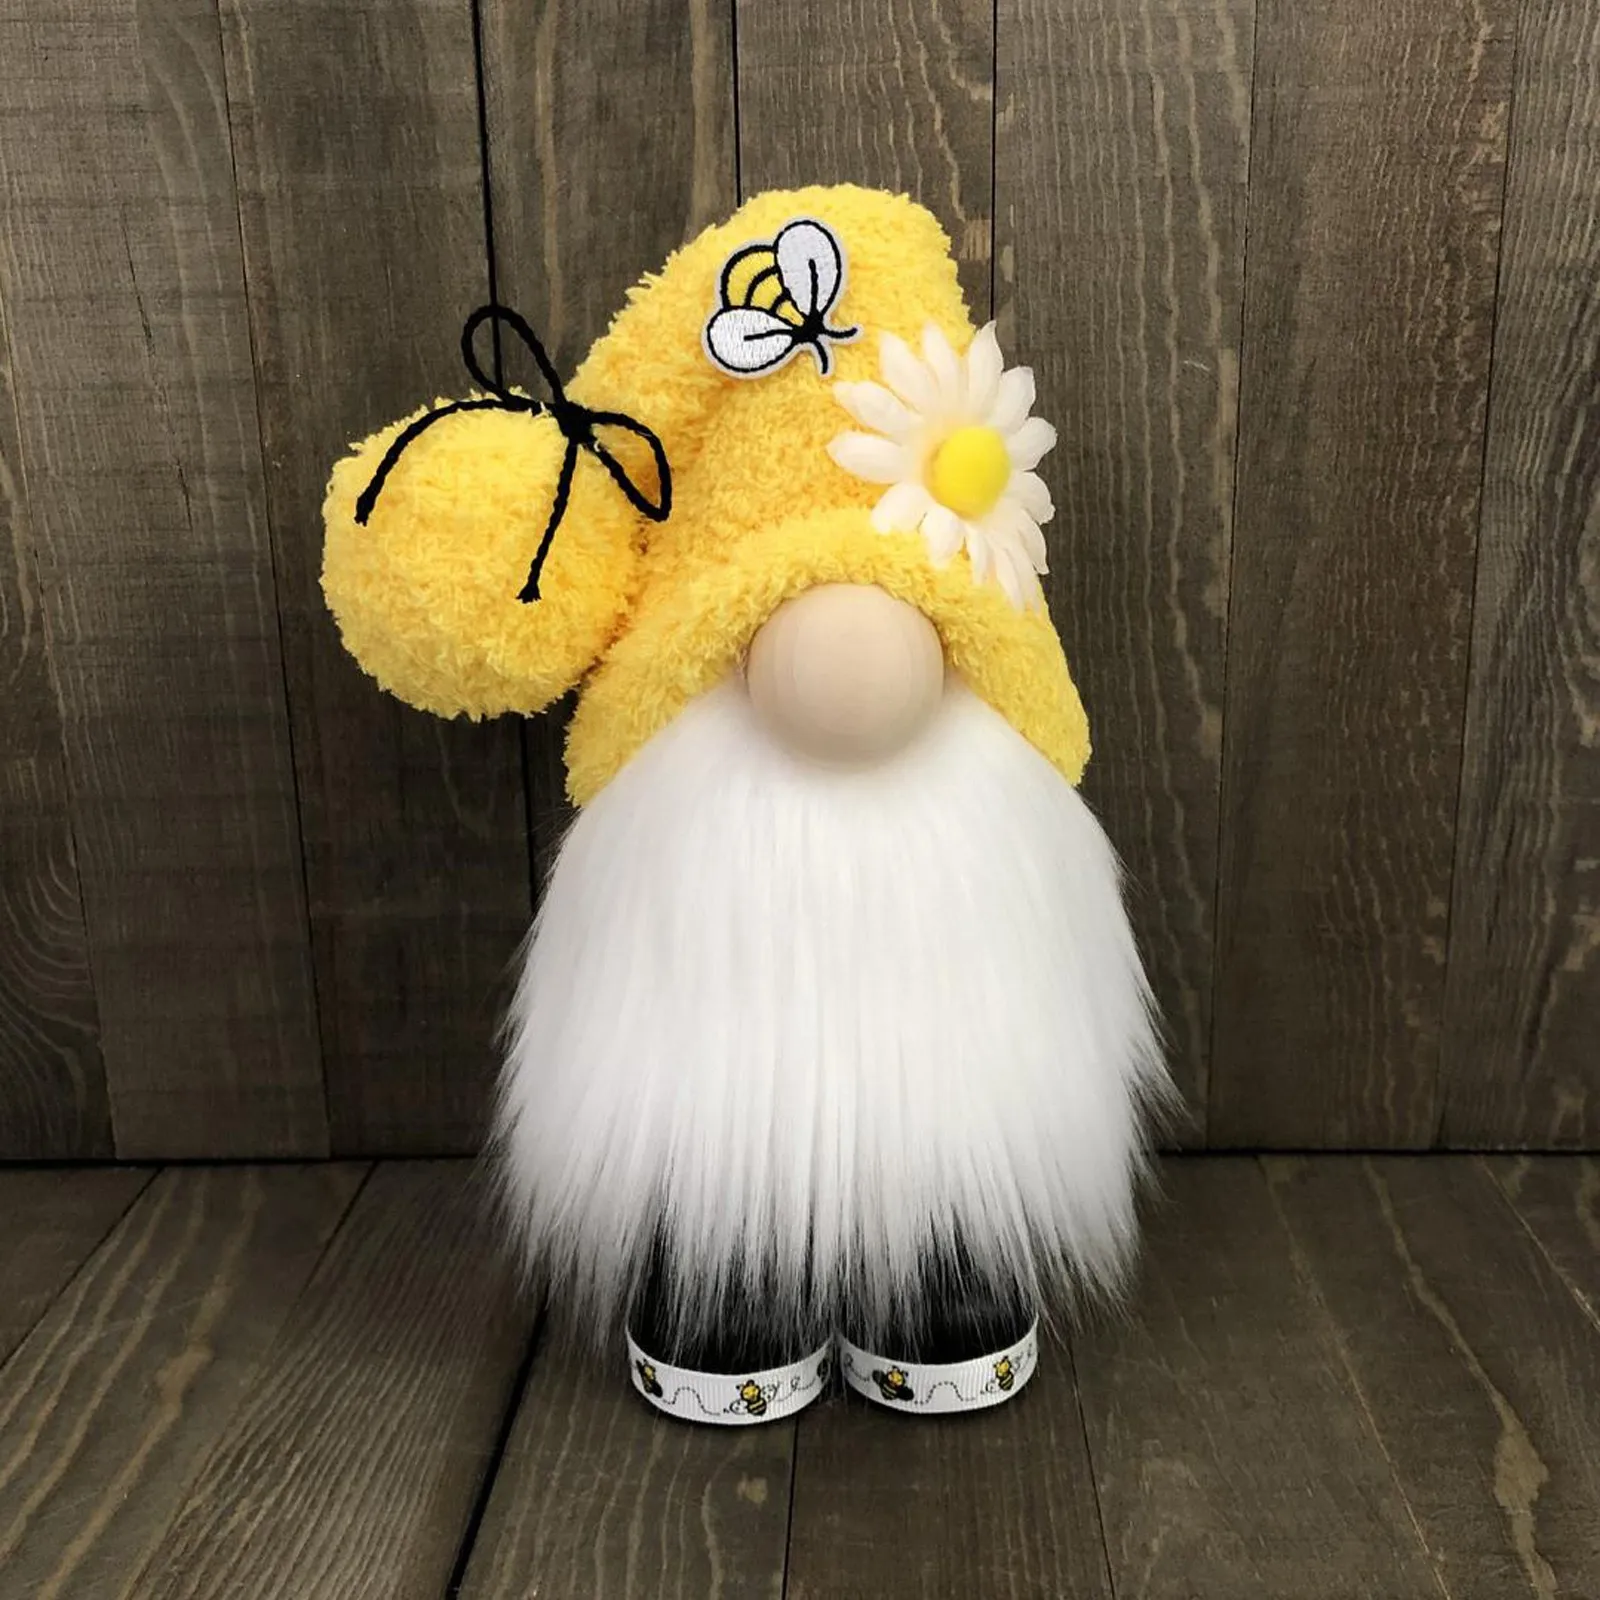 snowvirtuos Bumble Bee Gnome Faceless Doll Knitted Plush Scandinavian Tomte Nisse Swedish Decorations Honey Bee Sunflower For Farmhouse Home Kitchen Shelf Tiered Tray Plush Collection